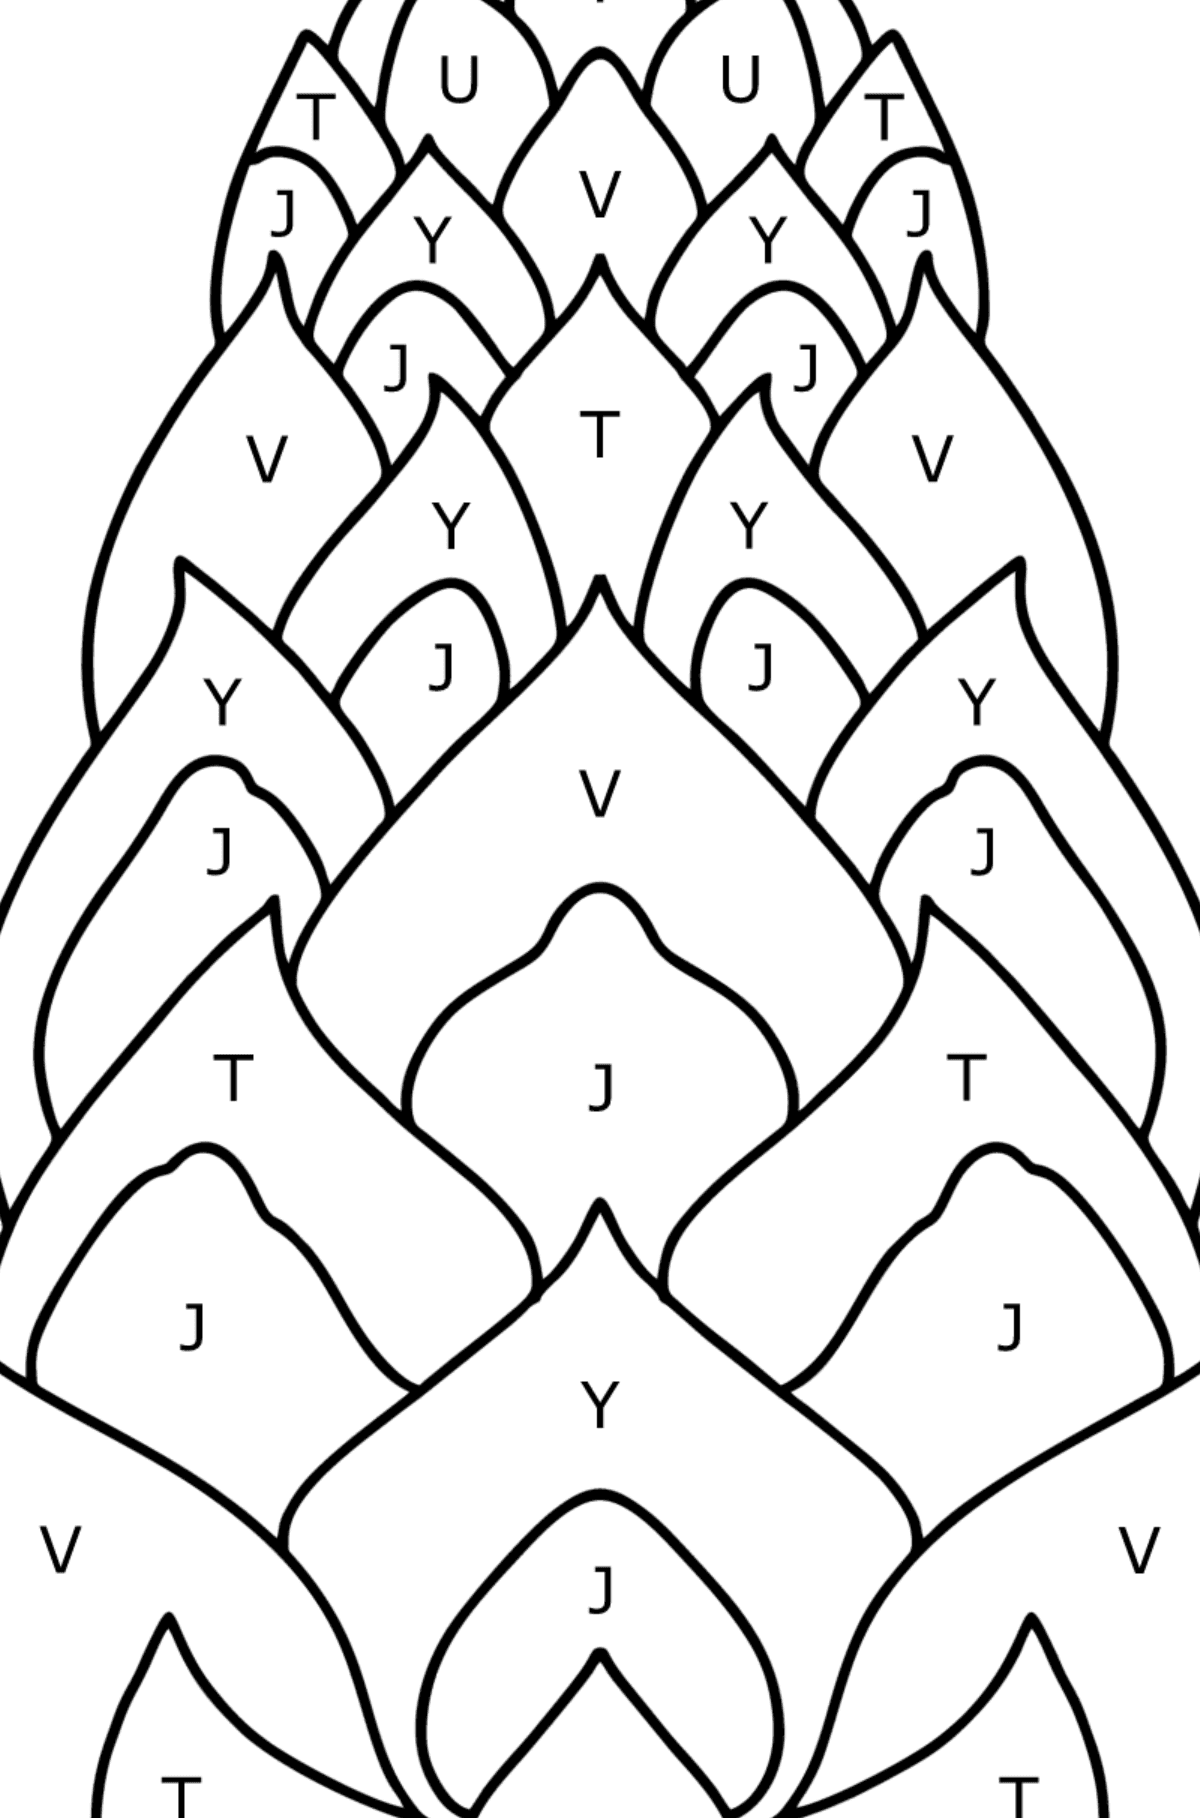 Pinecone from Lambert coloring page - Coloring by Letters for Kids